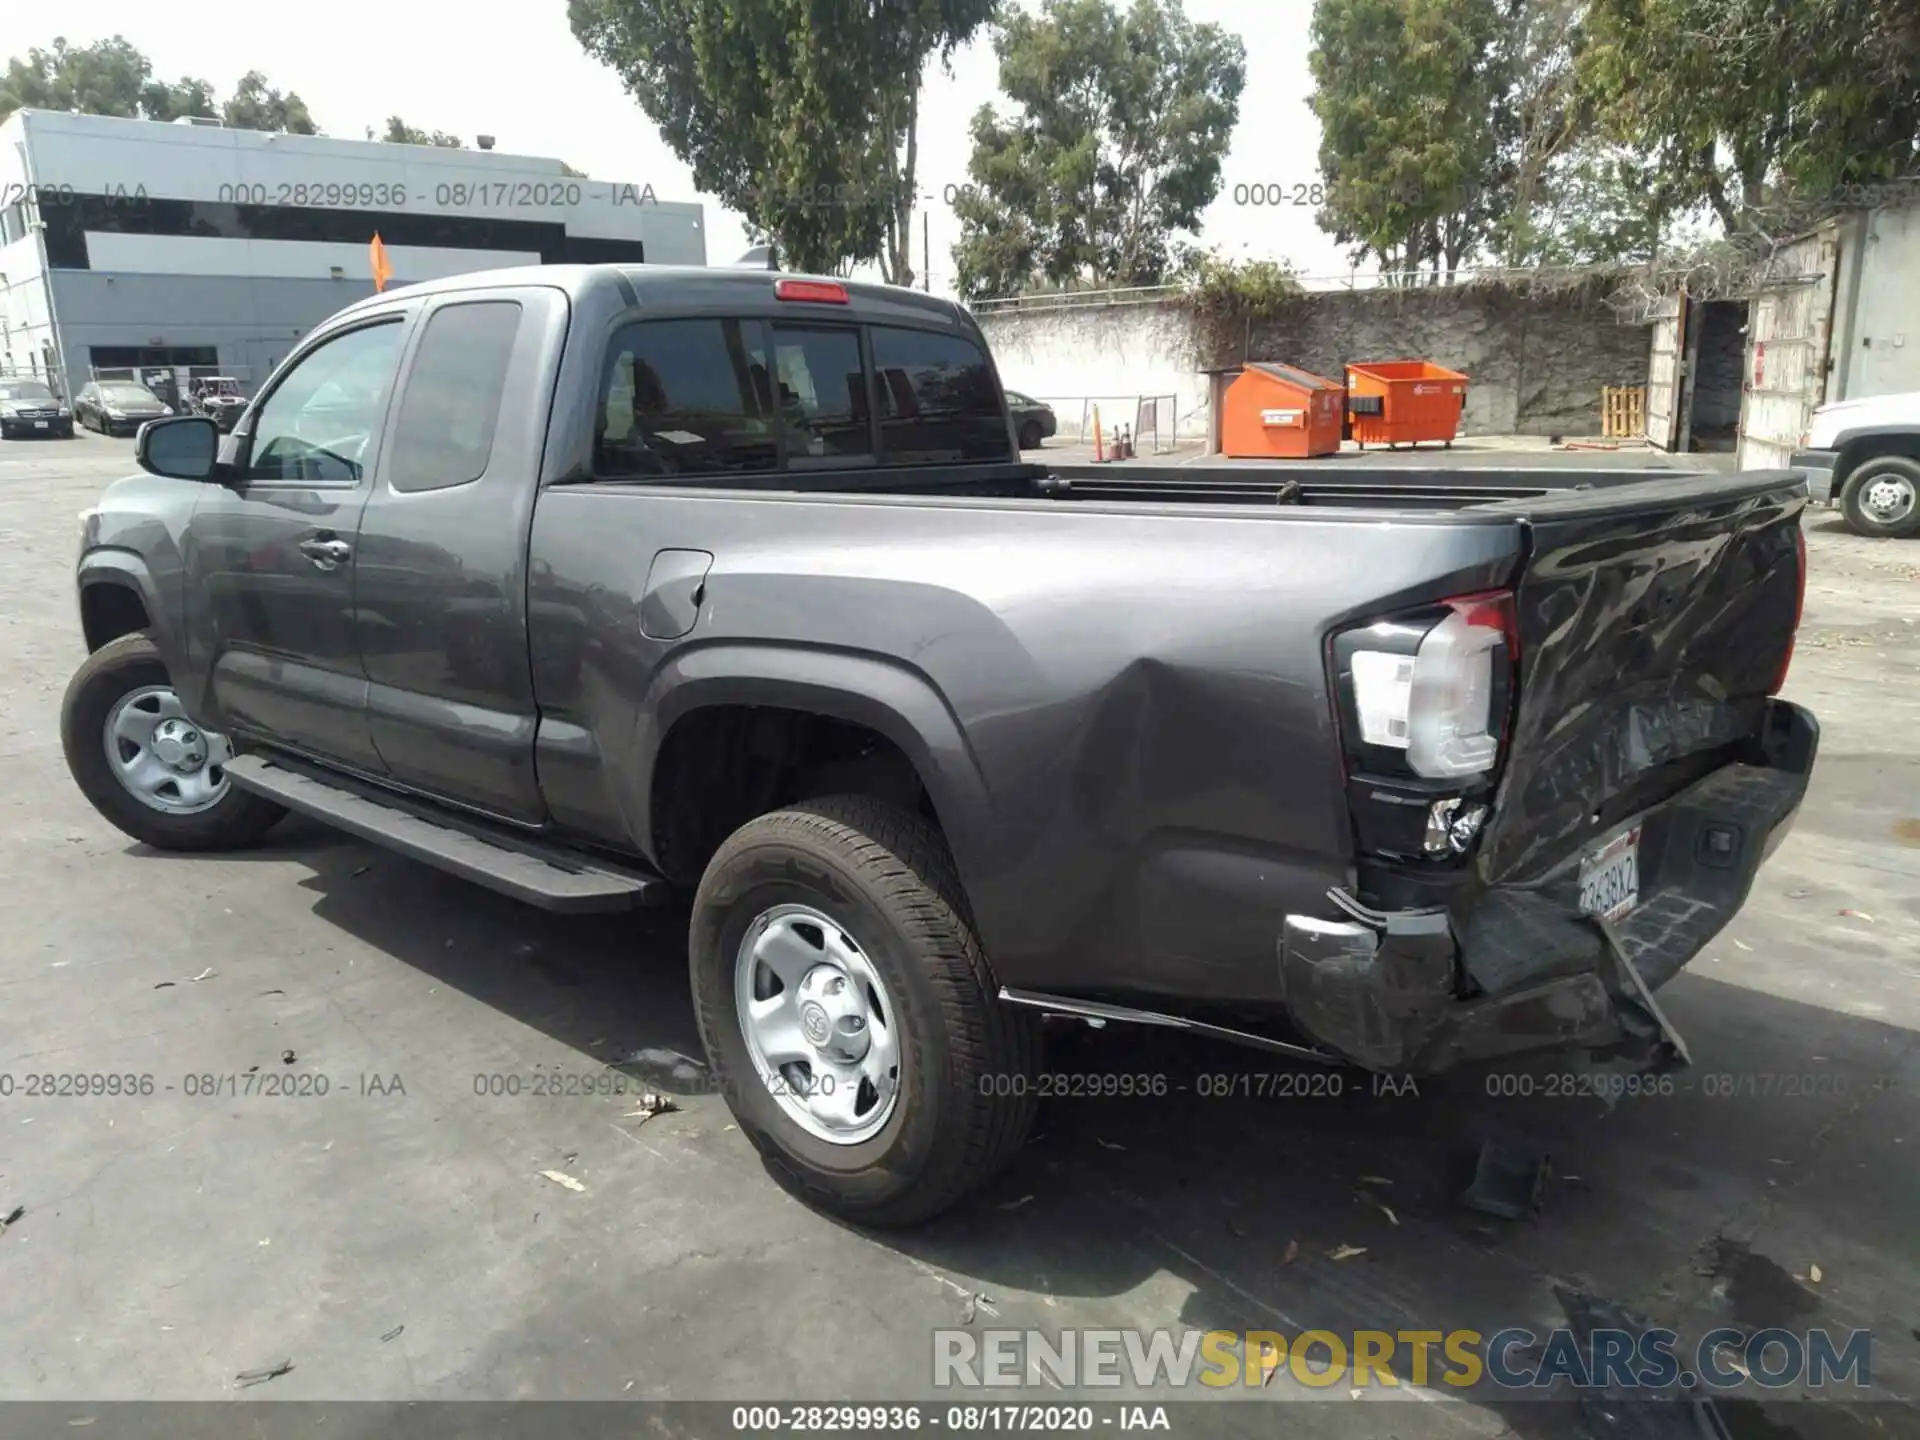 3 Photograph of a damaged car 5TFRX5GN5LX170738 TOYOTA TACOMA 2WD 2020